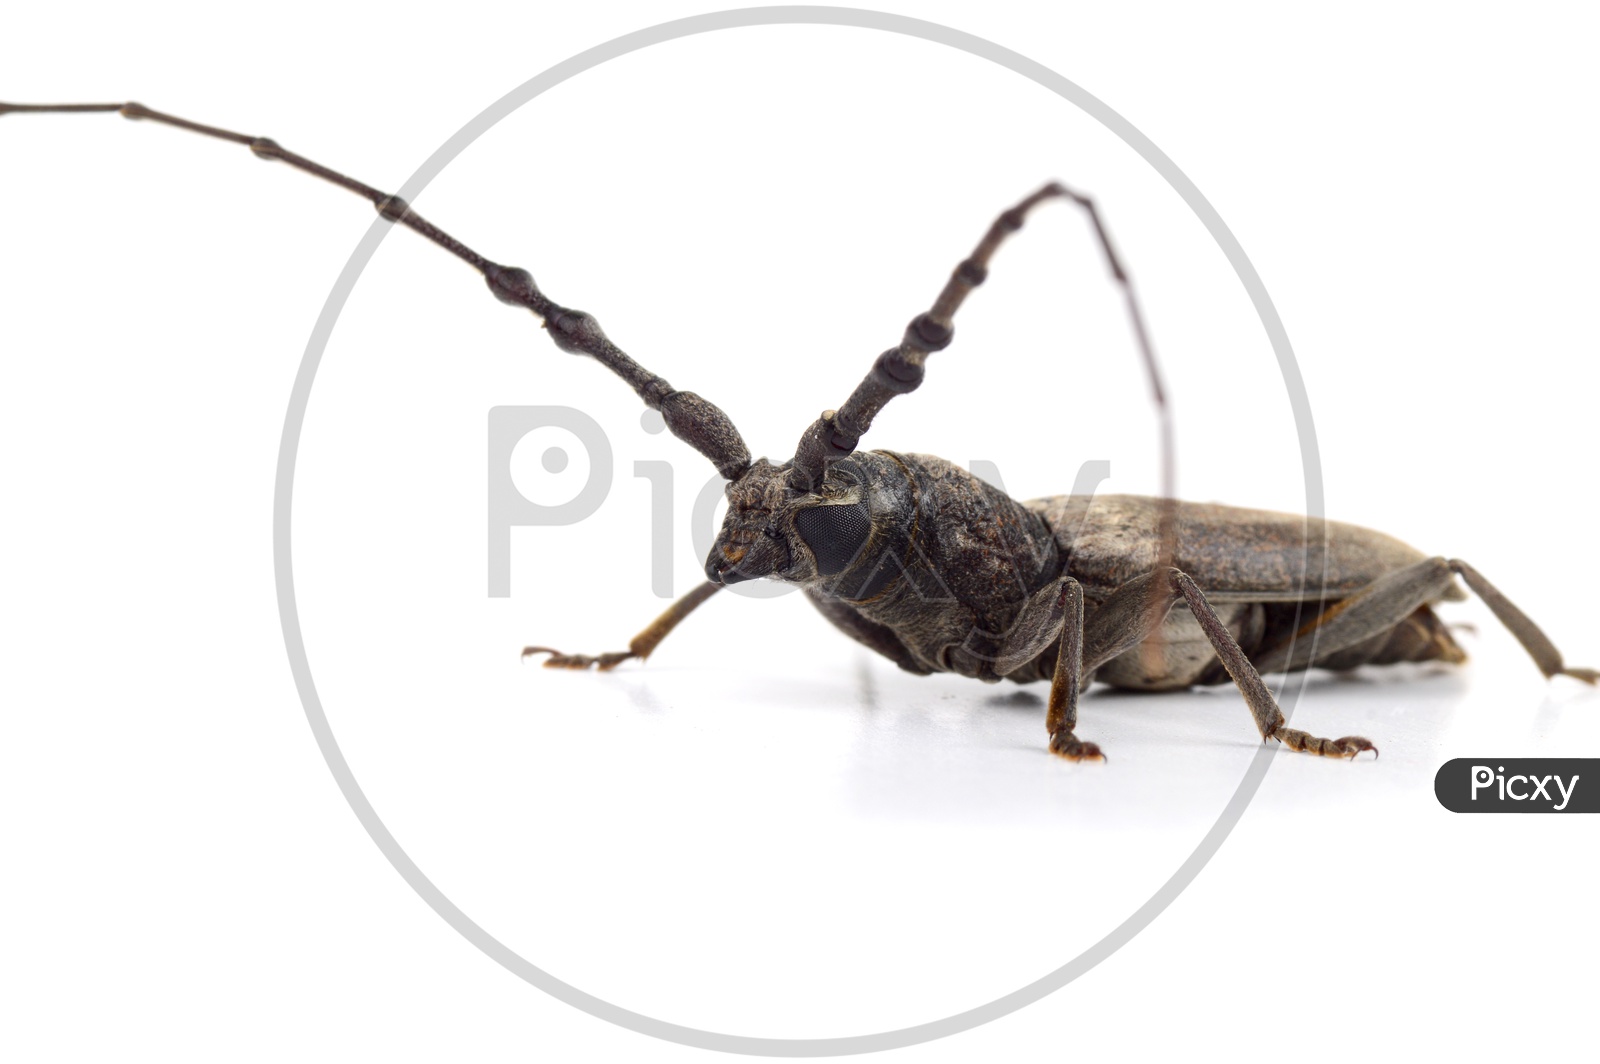 Borer ( Batocera  Rufomaculata  )  Insect or Wood-Boring  Insect  On an Isolated White Background